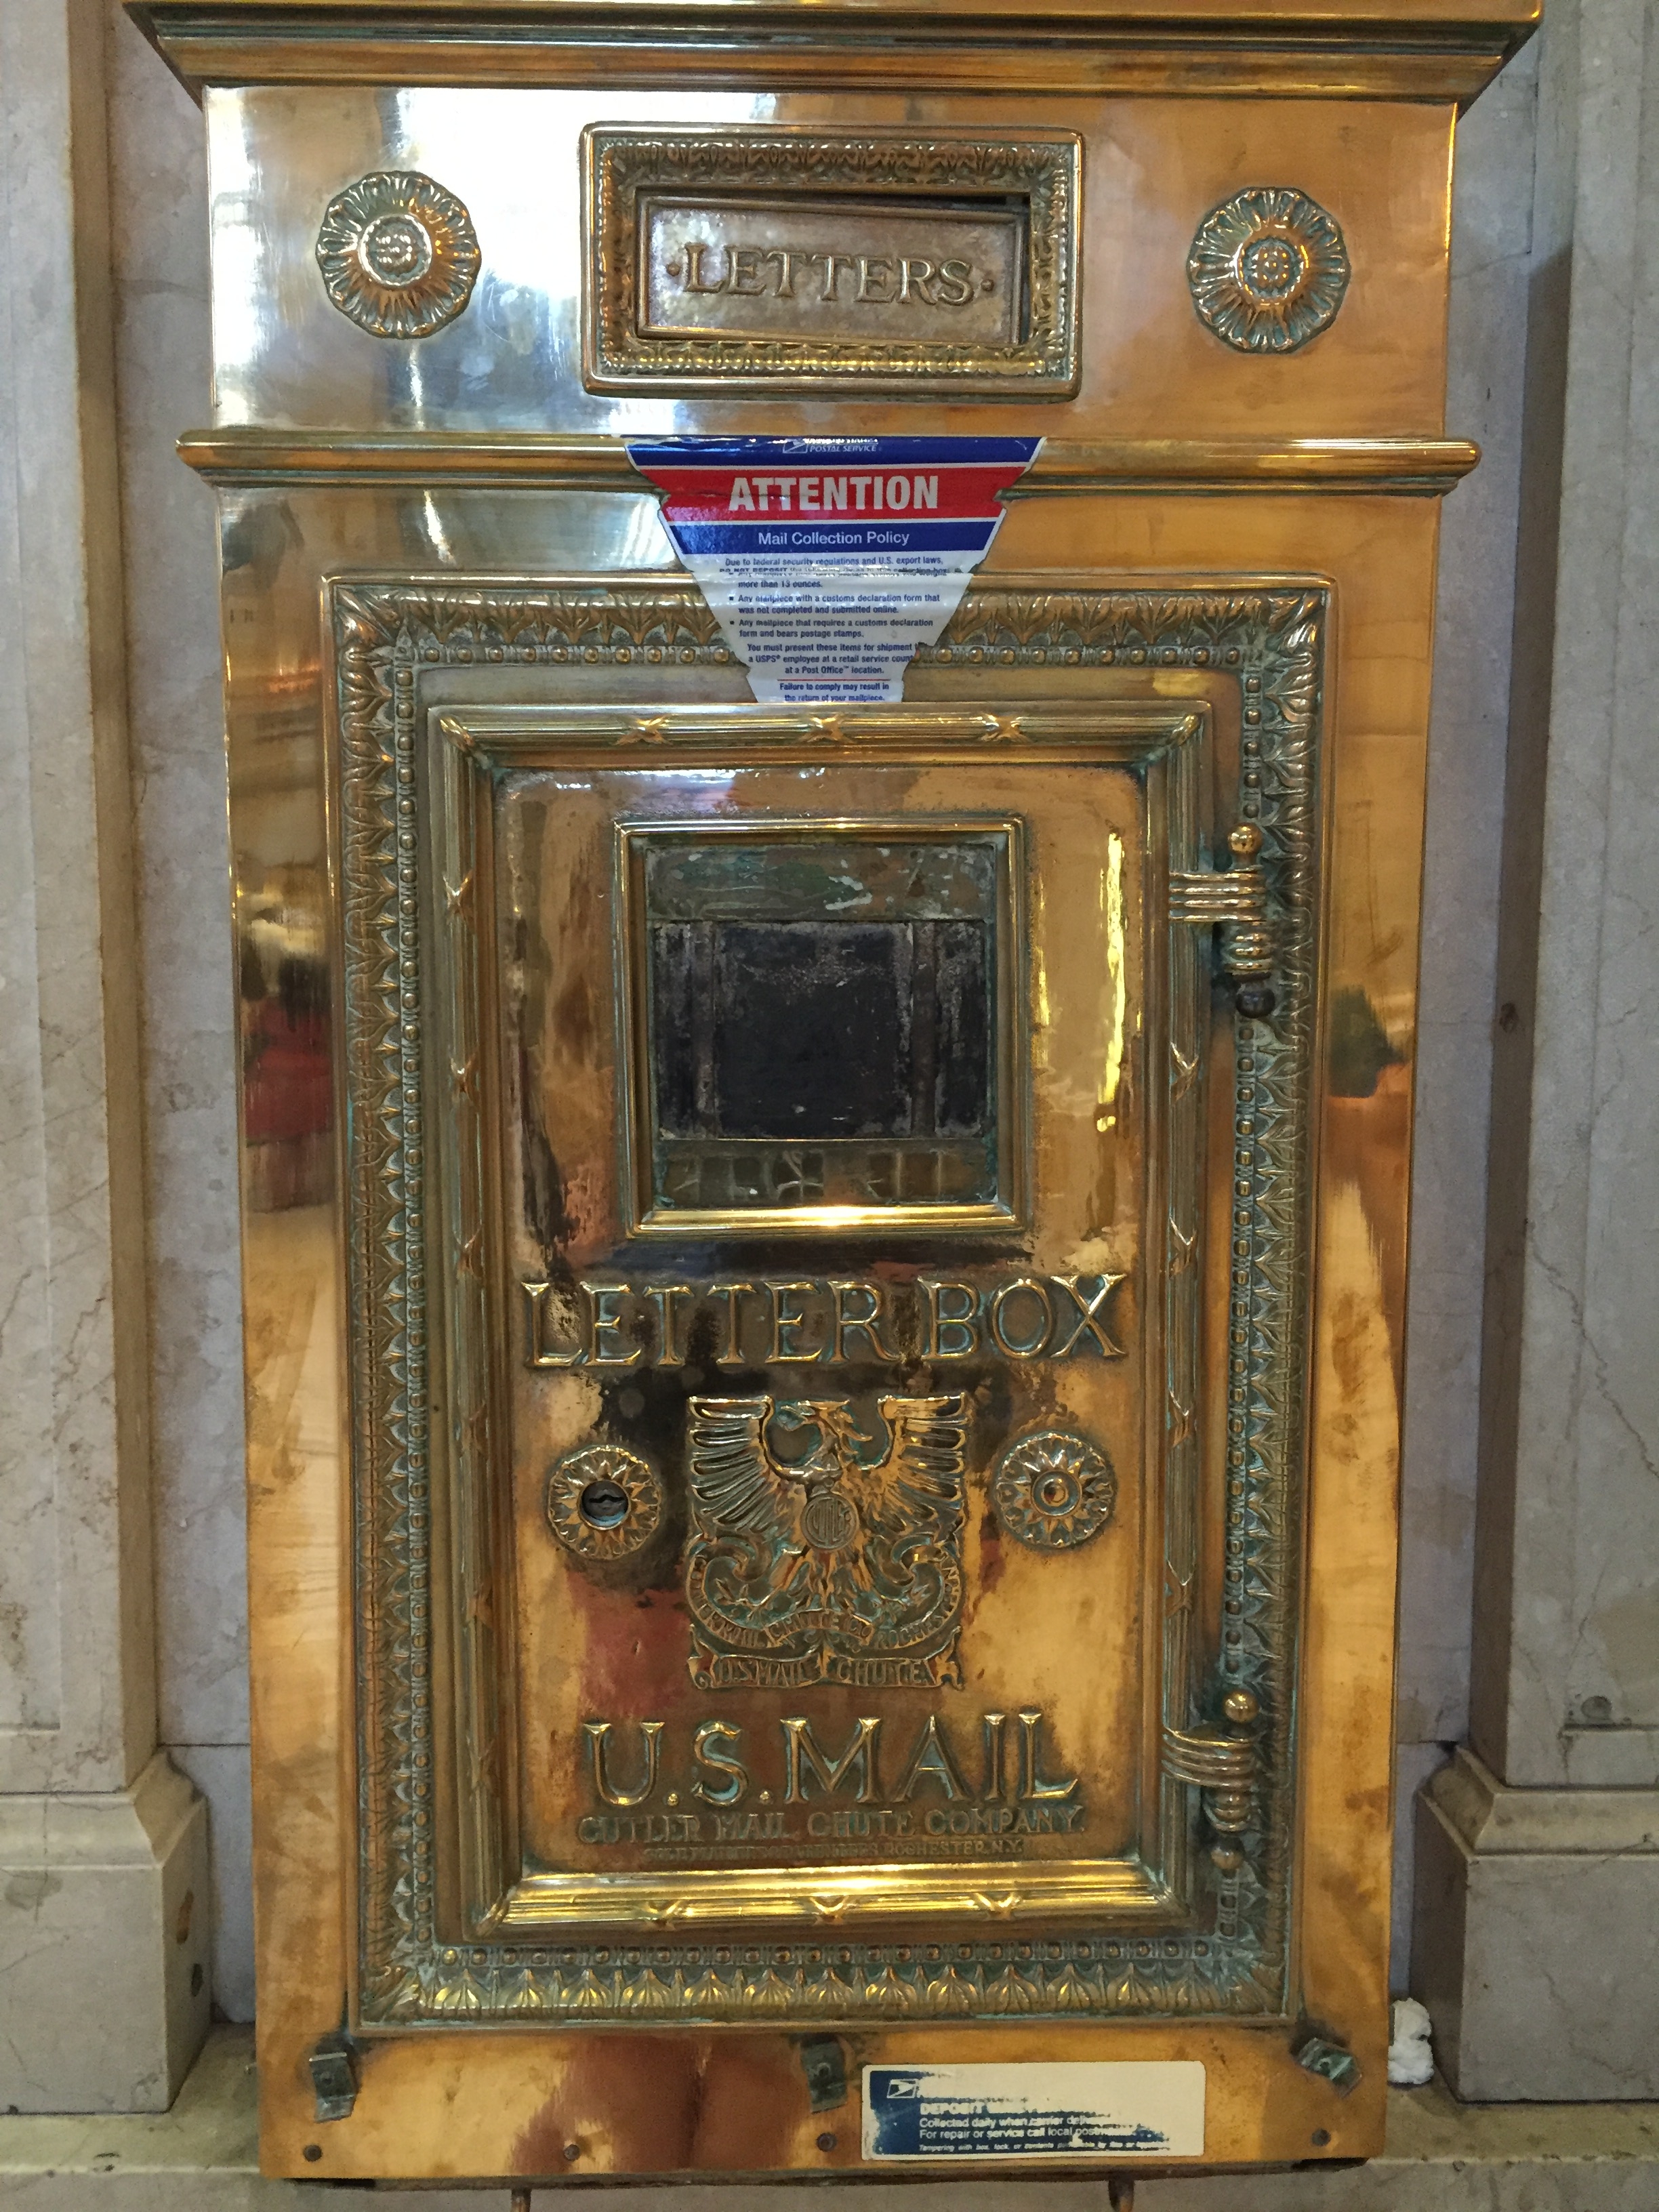 The letter box in New York City's Grand Central Station is hidden in plain sight. Photo credit: M. Ciavardini